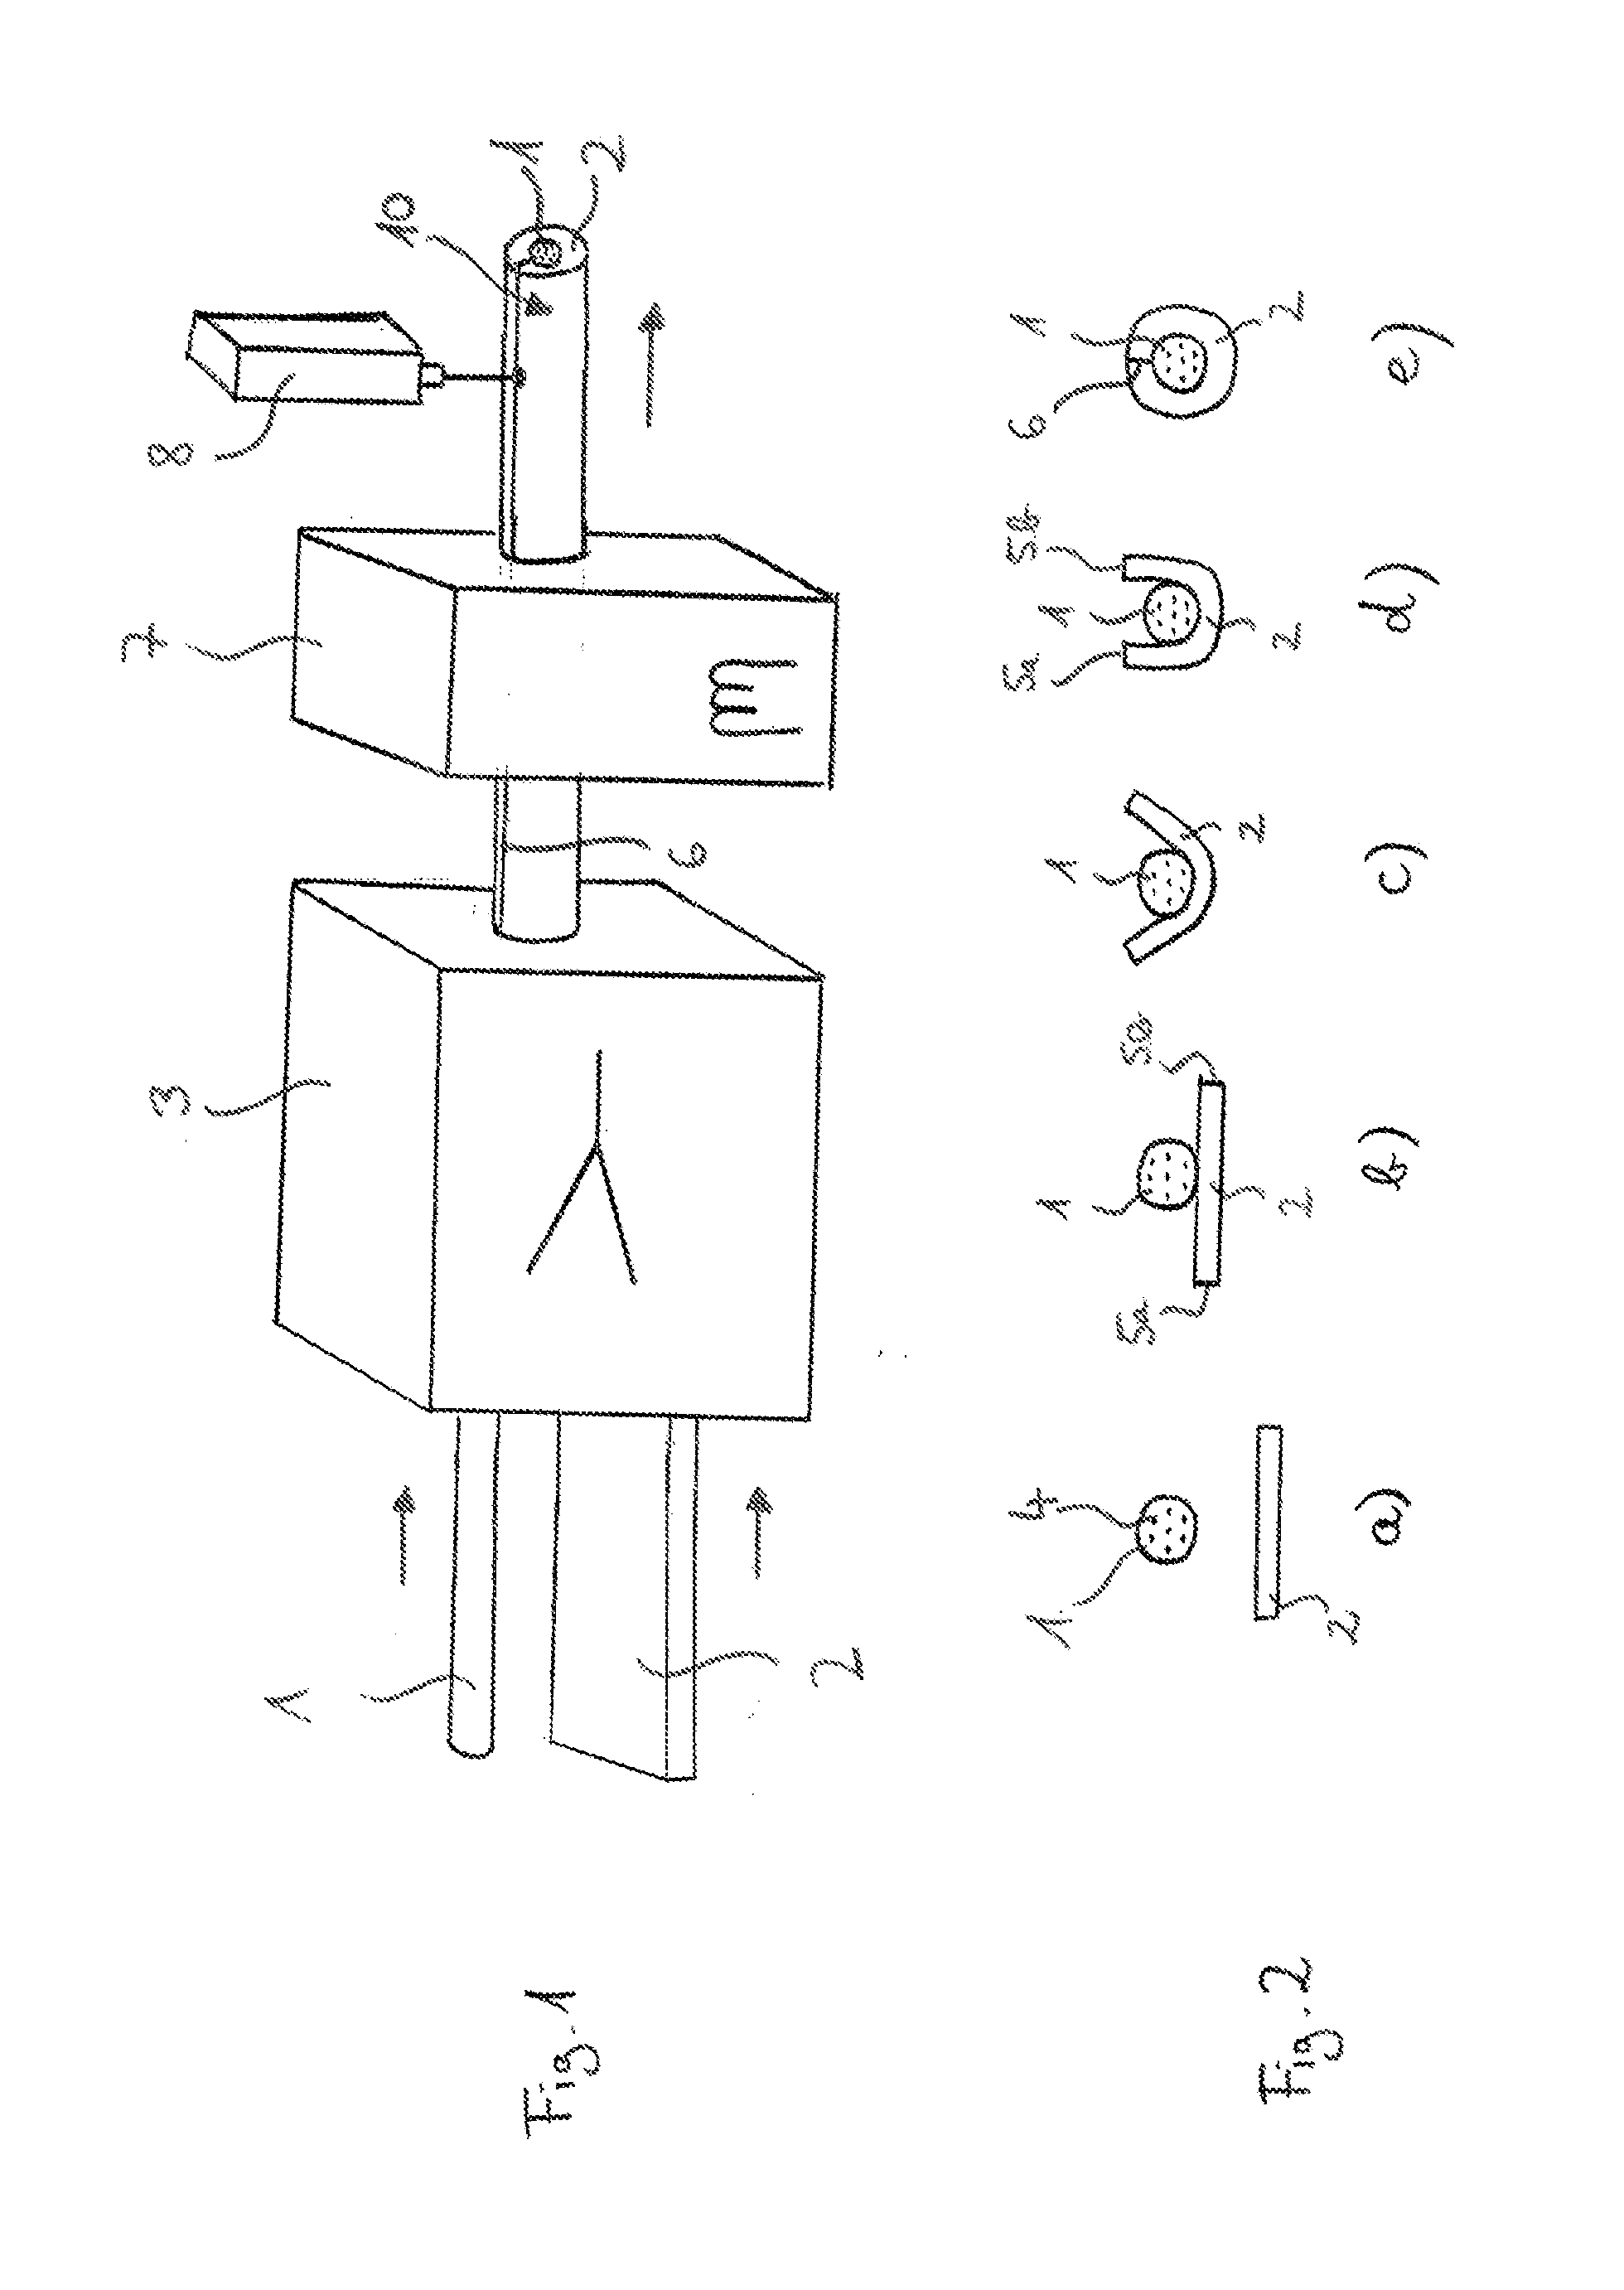 Method for producing a superconducting wire, in particular using lead-free solder